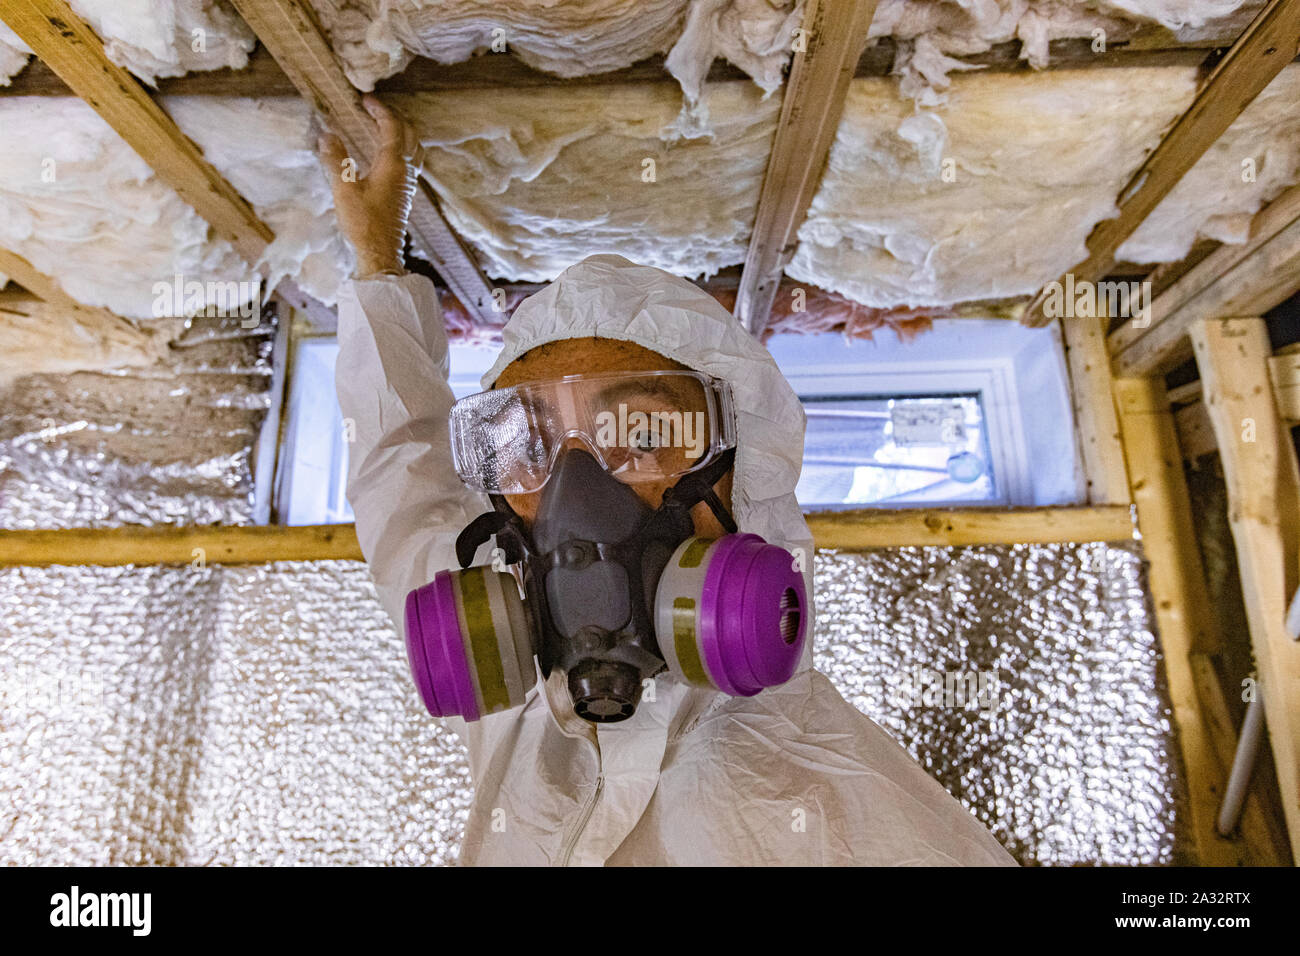 A close up view of a building inspector at work, checking insulation between floor joists and timber frame cavity walls, with copy space. Stock Photo